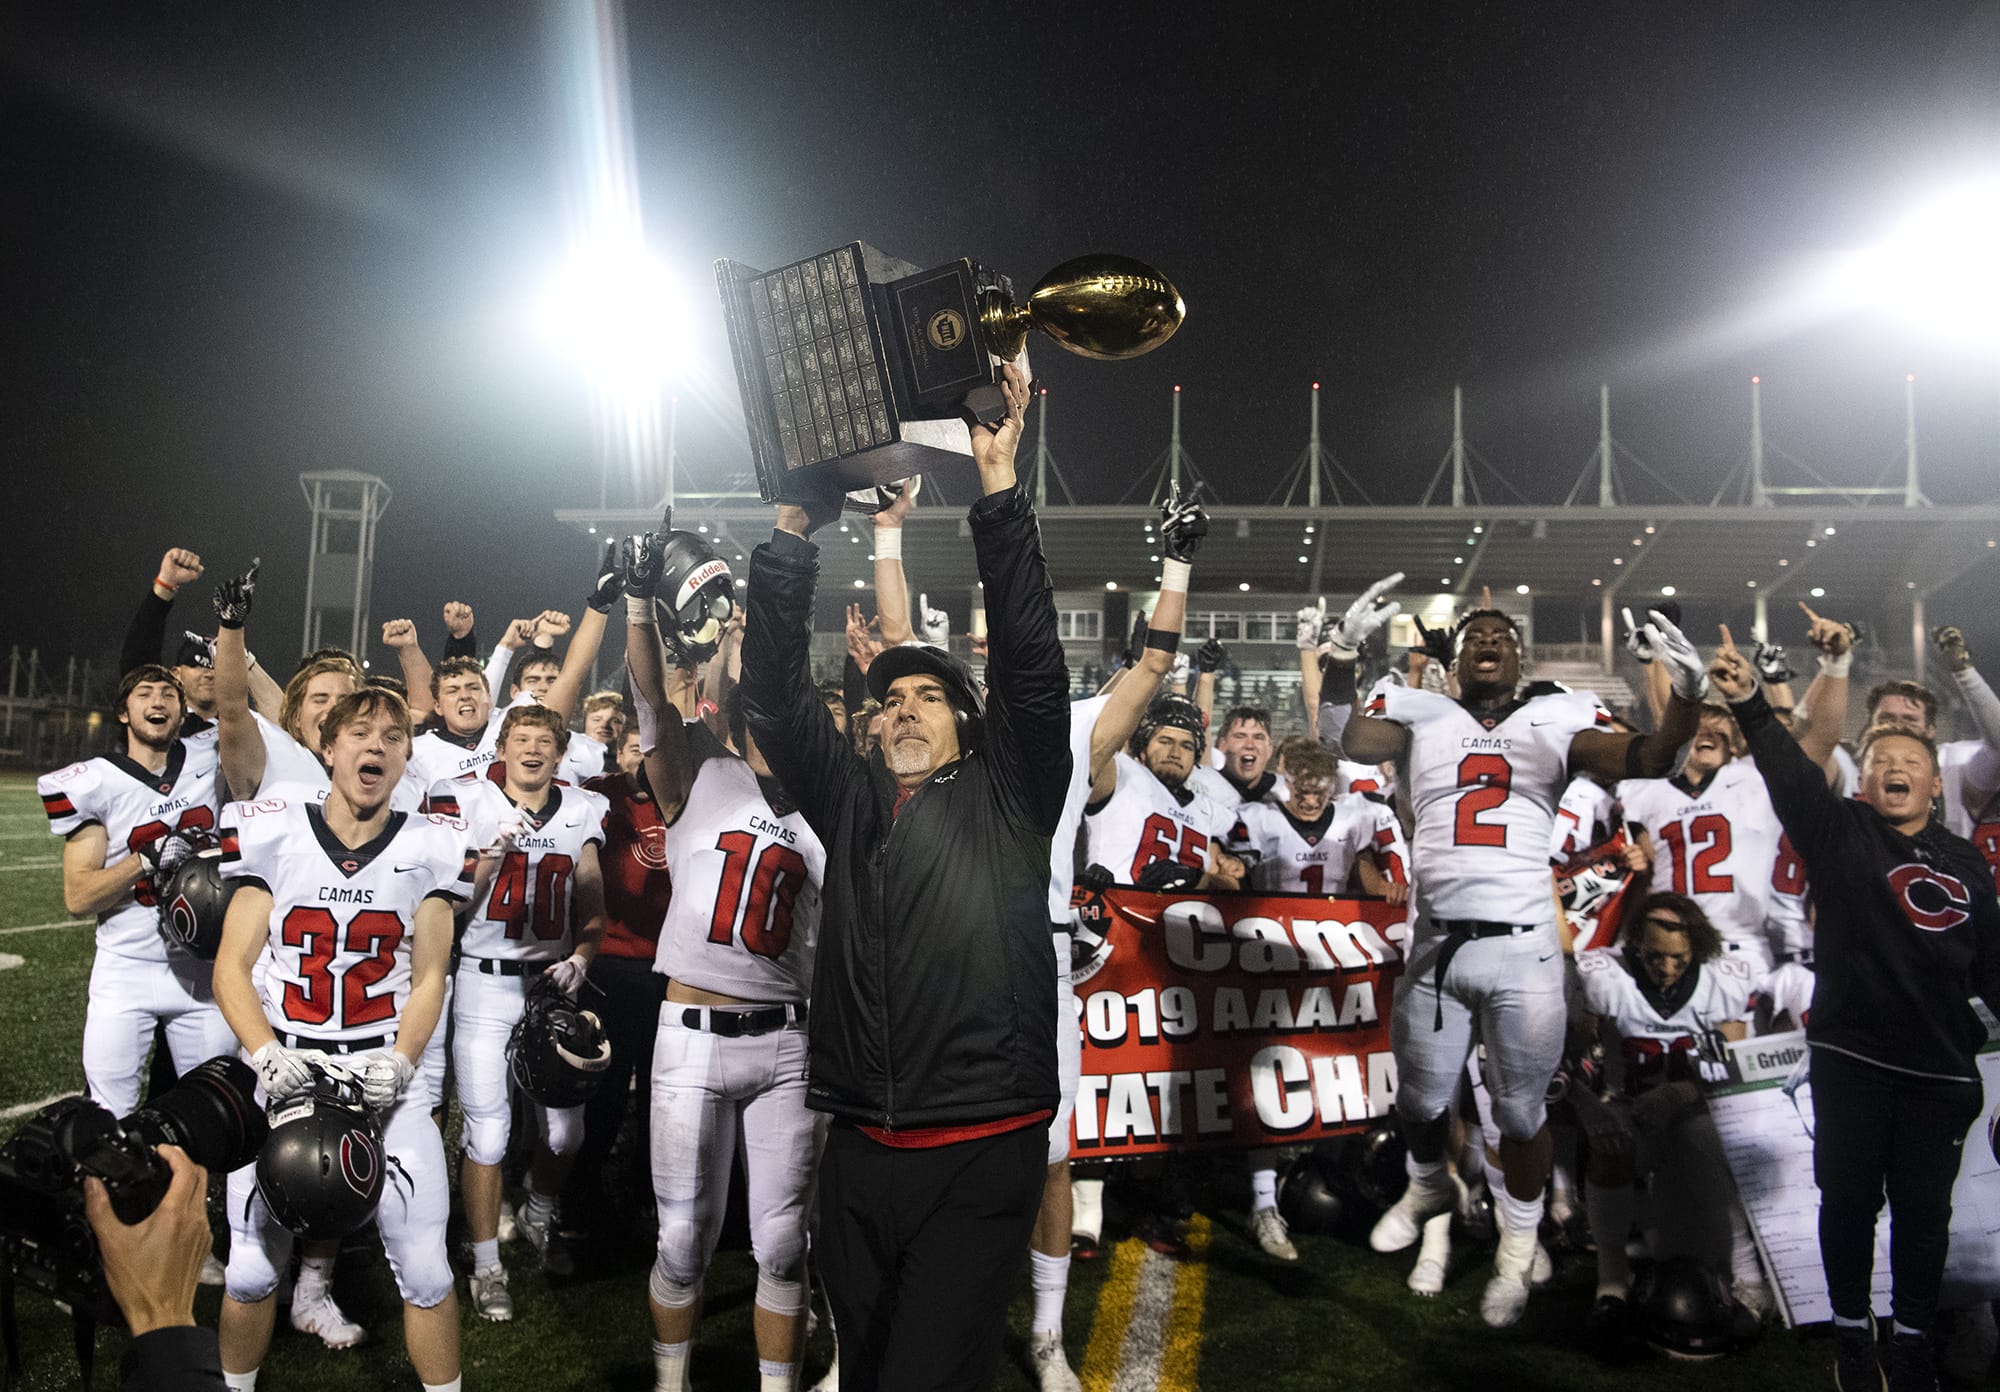 Camas head coach Jon Eagle hoists the trophy into the air after SaturdayÕs win in the Class 4A state championship game against Bothell at Mount Tahoma High School in Tacoma on Dec. 7, 2019.